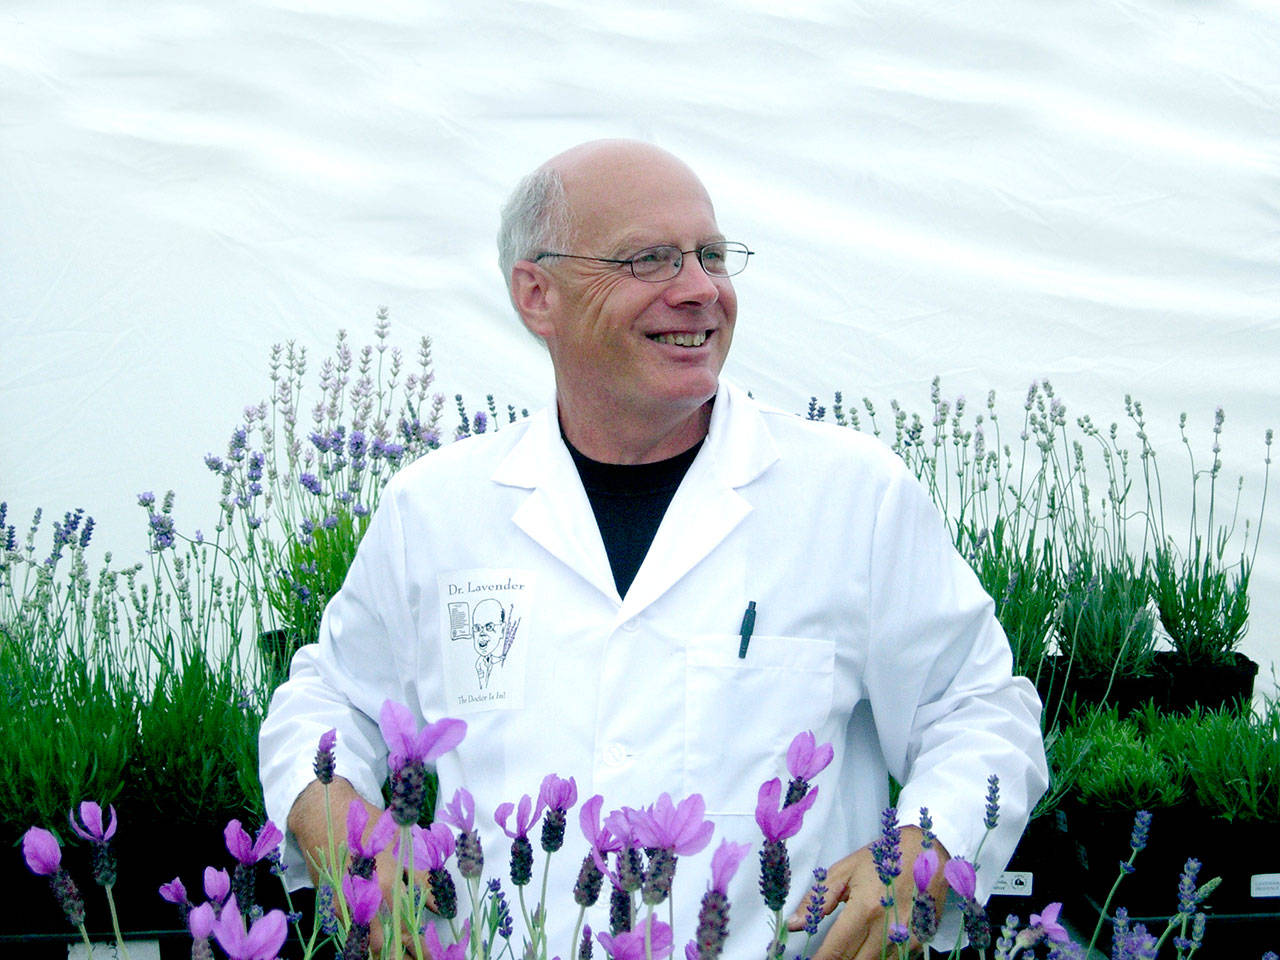 Paul Jendrucko, aka Dr. Lavender, poses for a portrait among the blooms. (Mary Jendrucko)